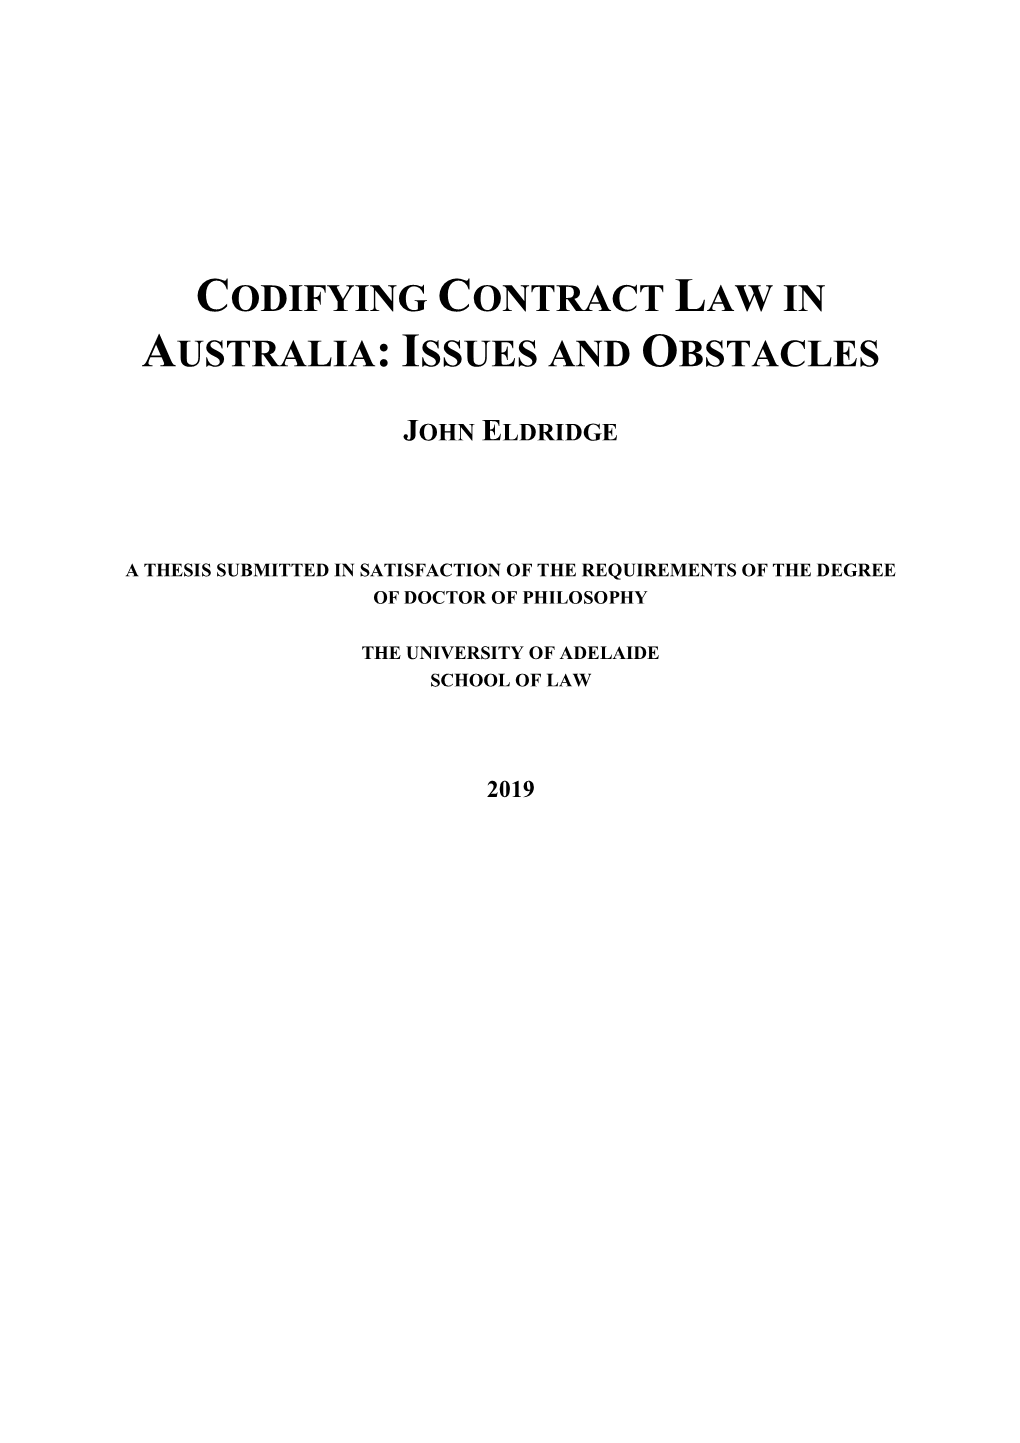 Codifying Contract Law in Australia: Issues and Obstacles